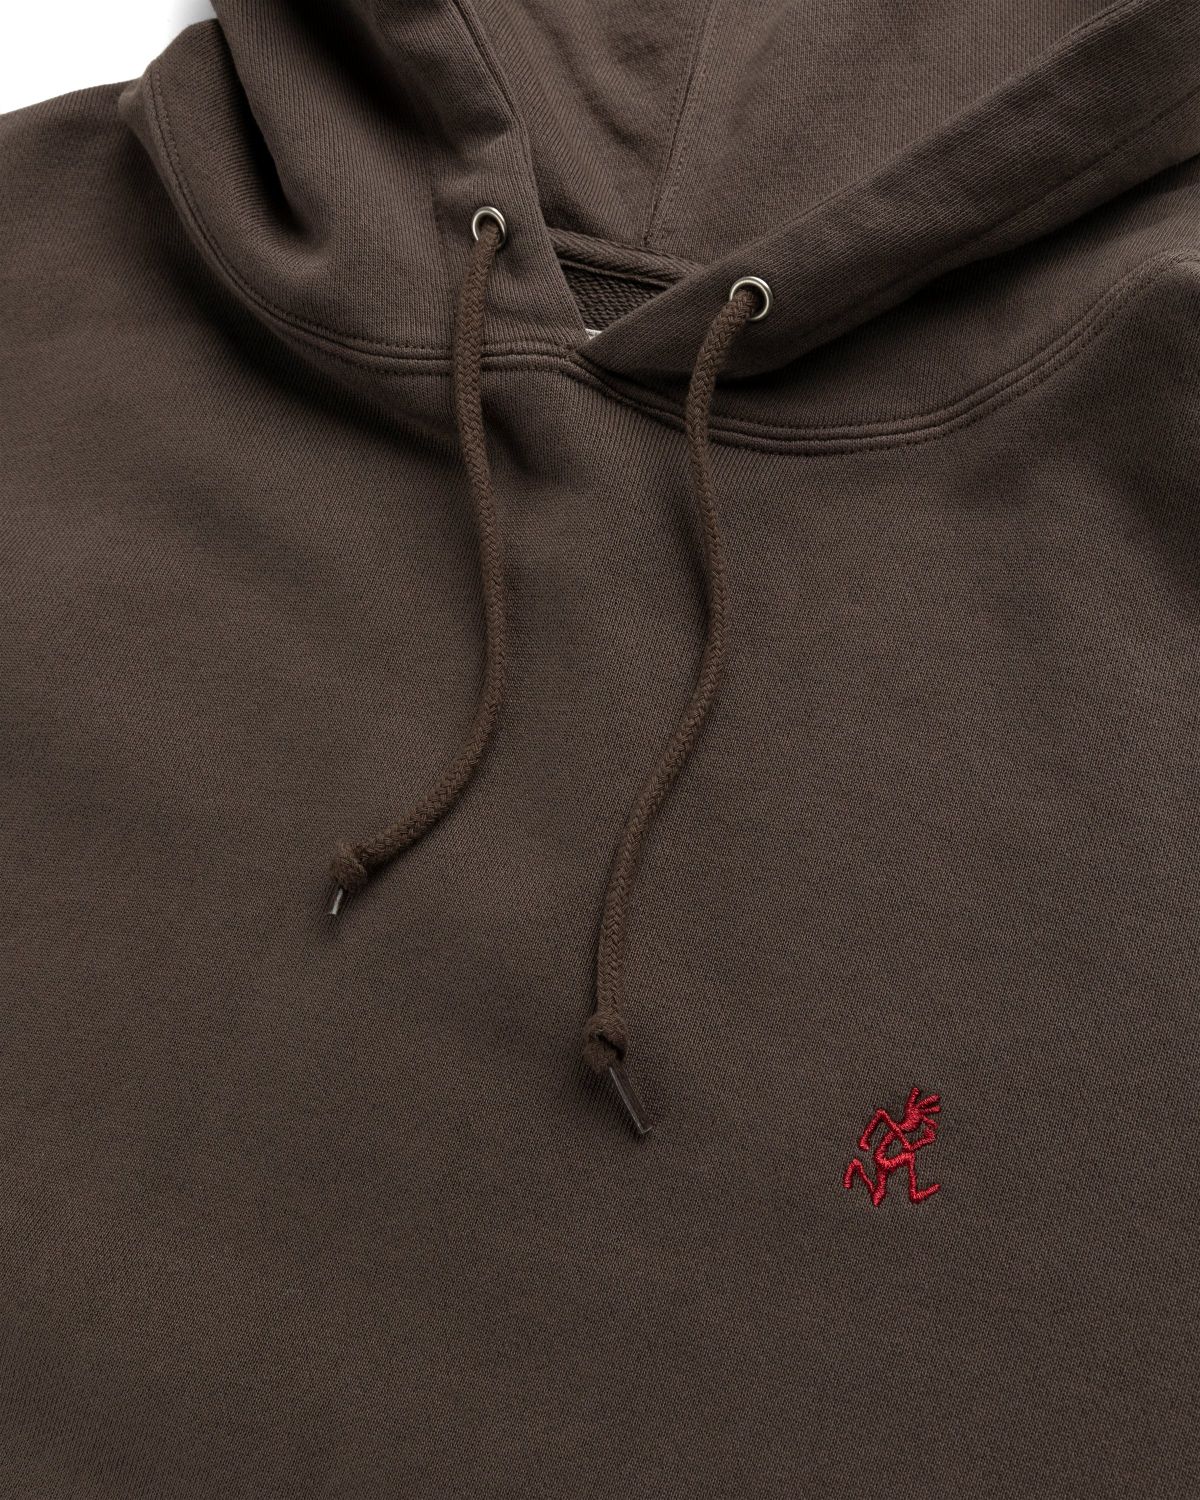 Gramicci – One Point Hooded Sweatshirt Brown Pigment - Sweats - Brown - Image 3